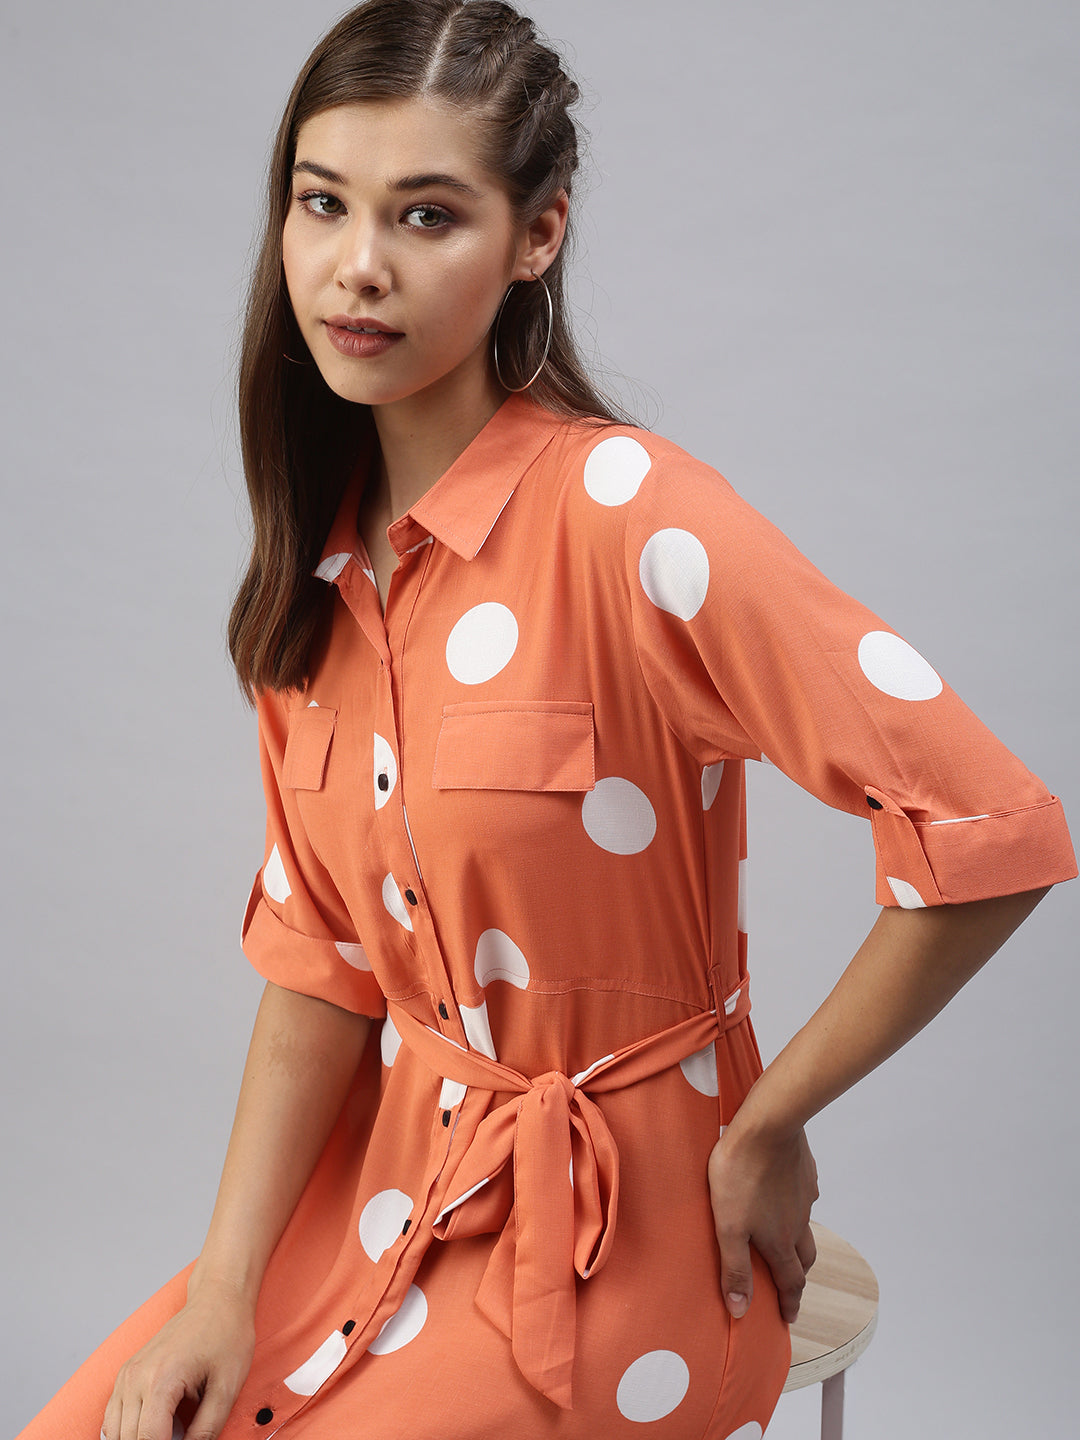 Women Printed Fit and Flare Orange Dress